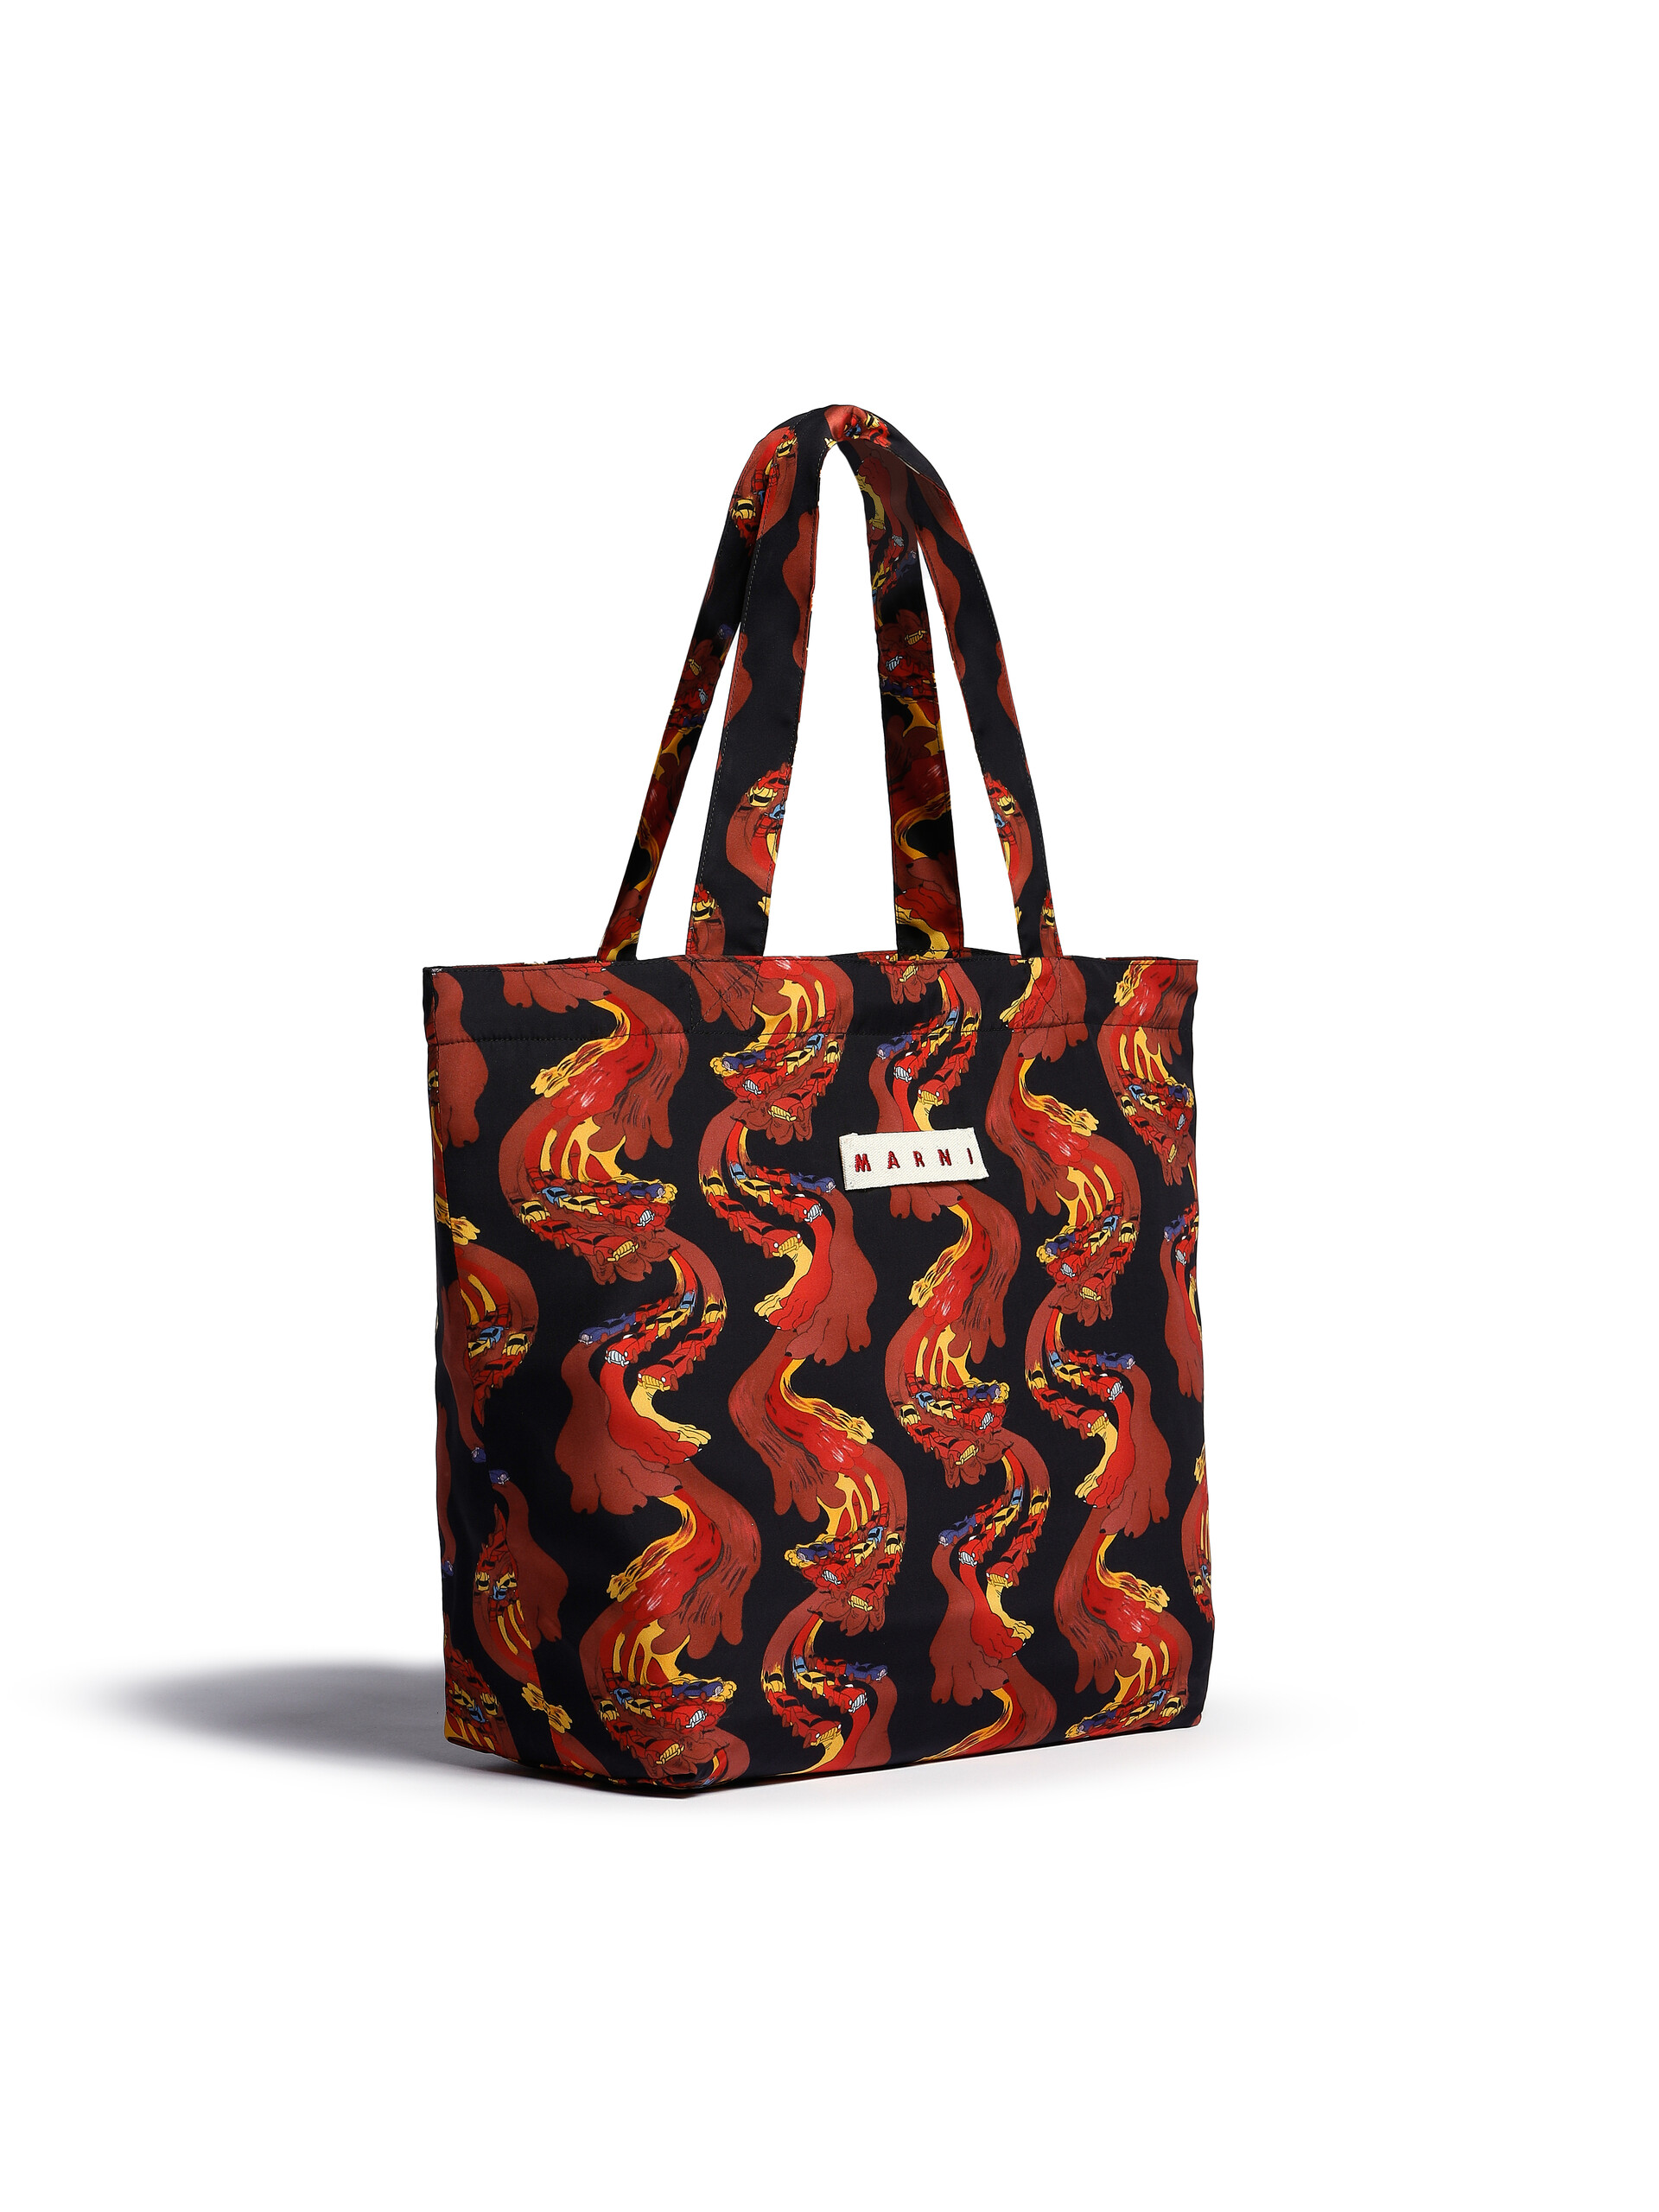 Black viscose tote bag with archival multicoloured print - Shopping Bags - Image 2